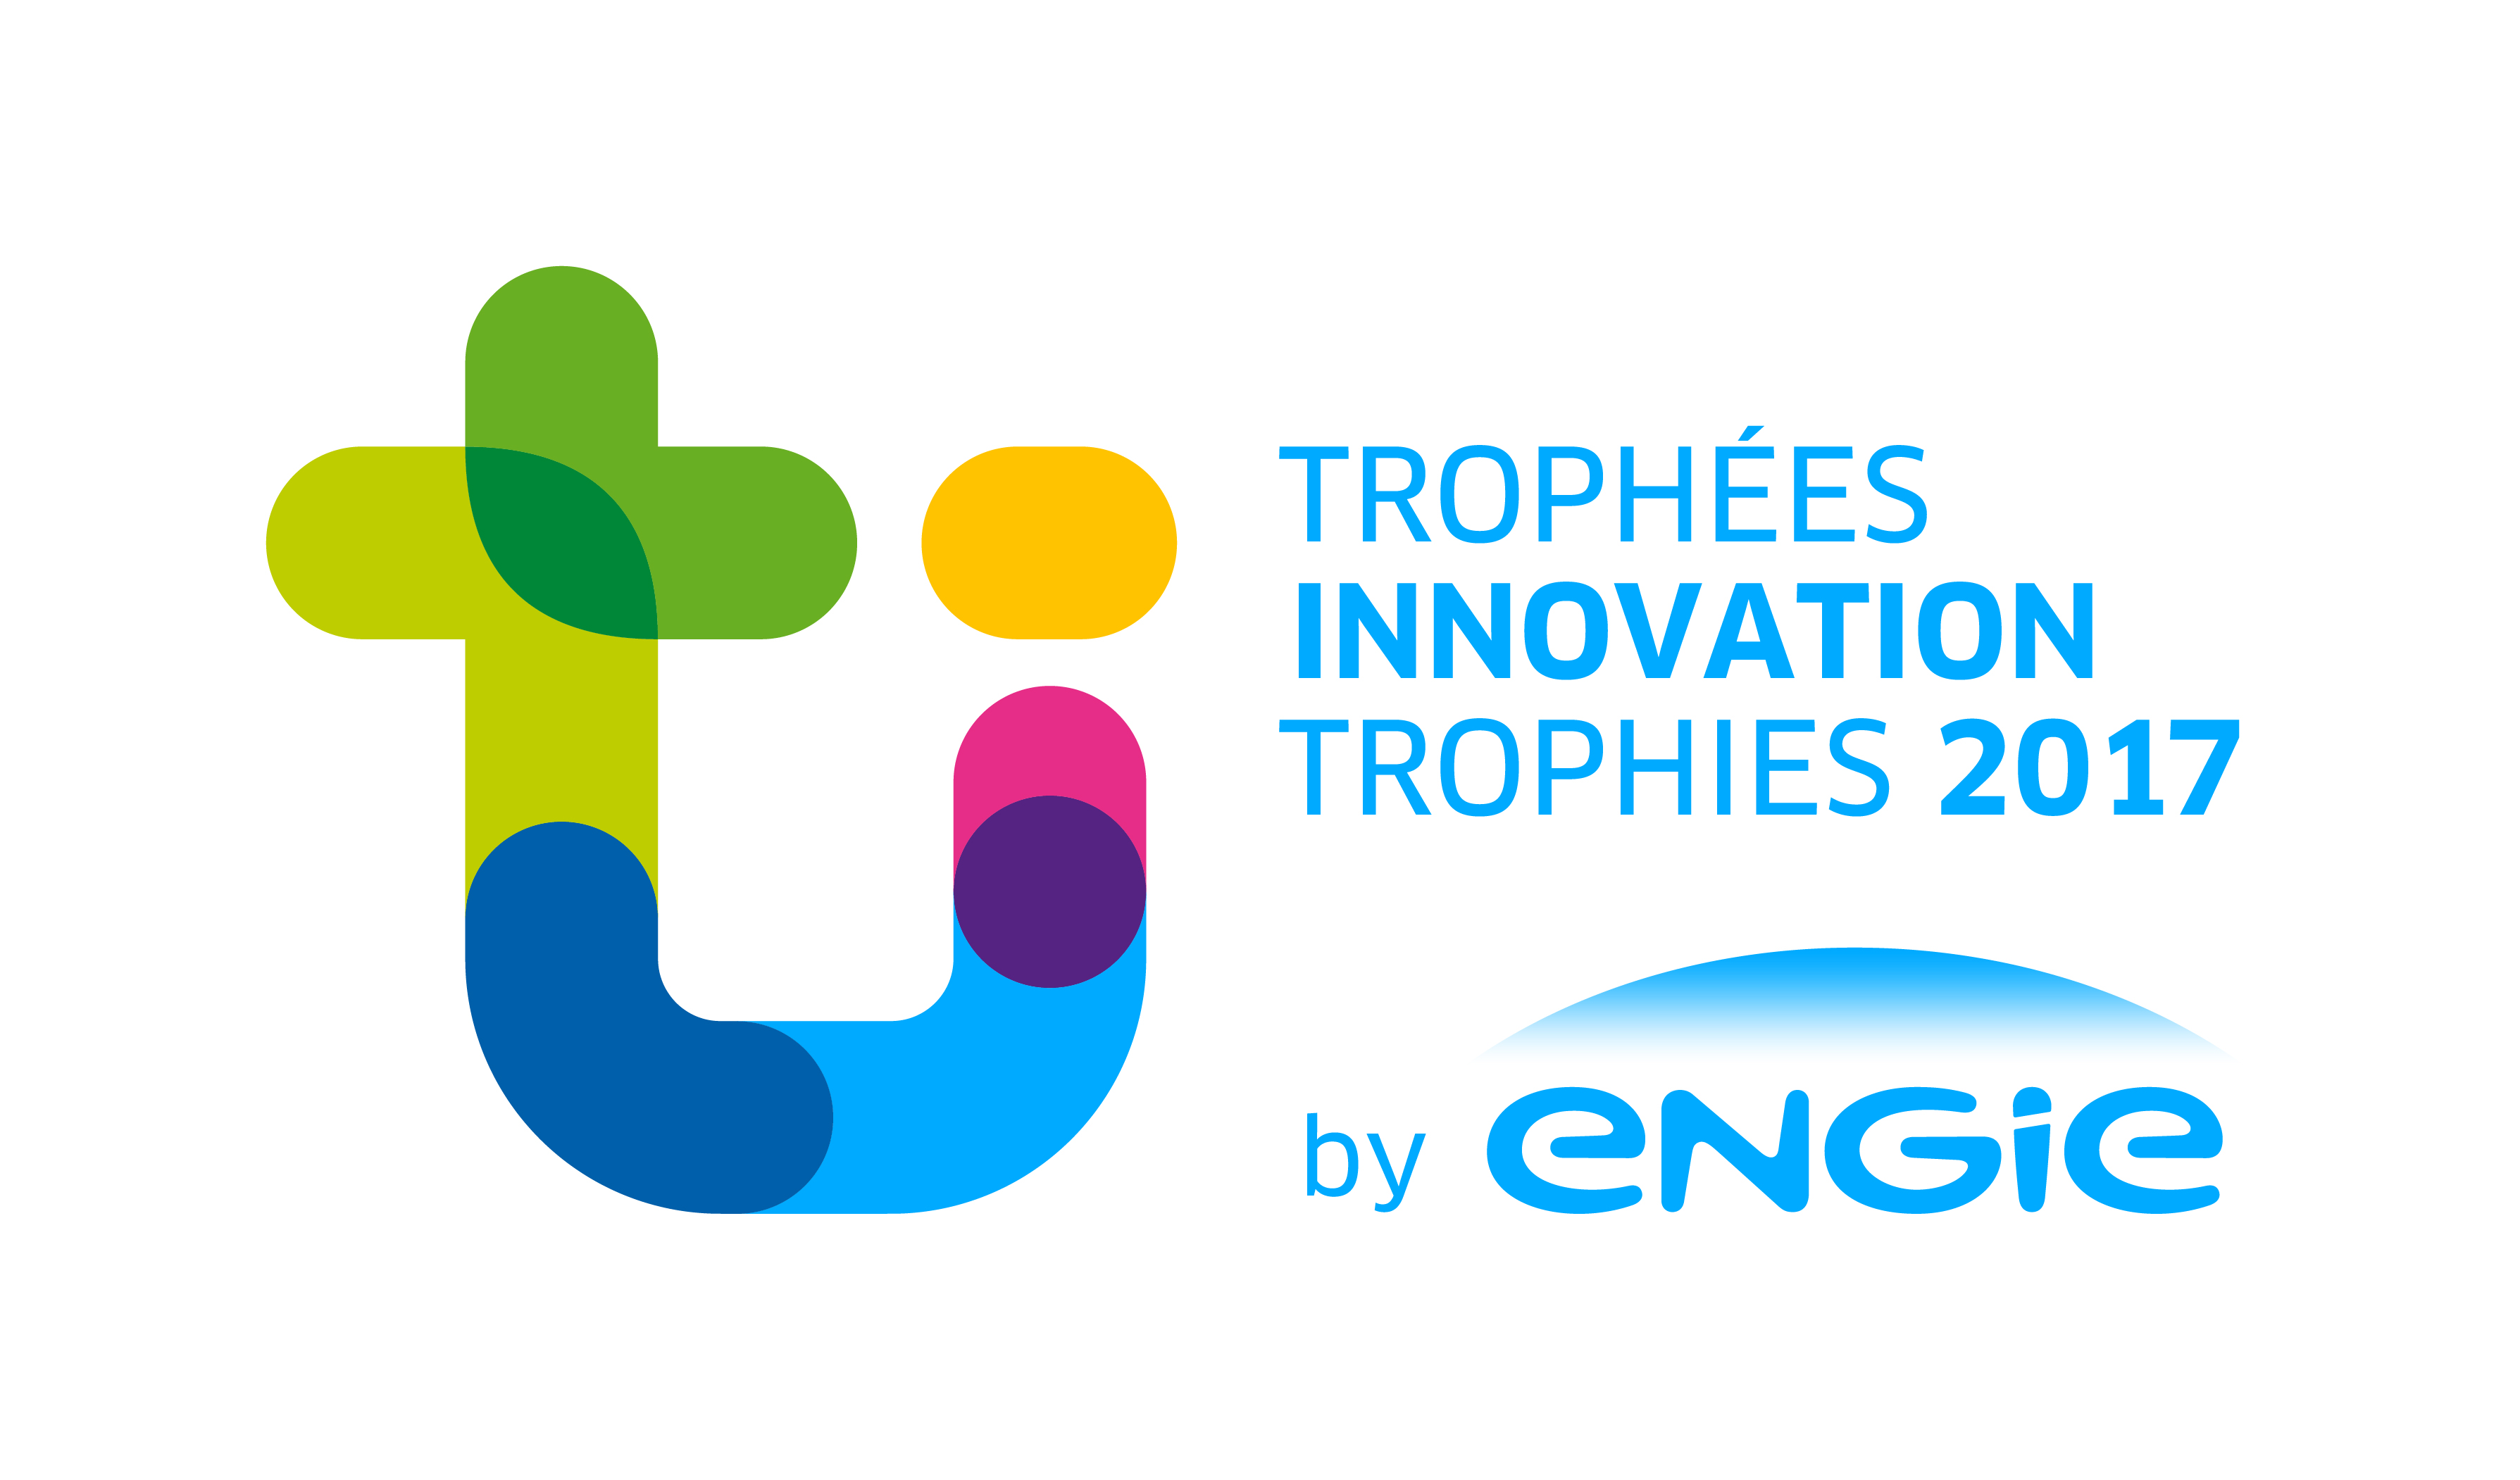 Innovation Trophies Day